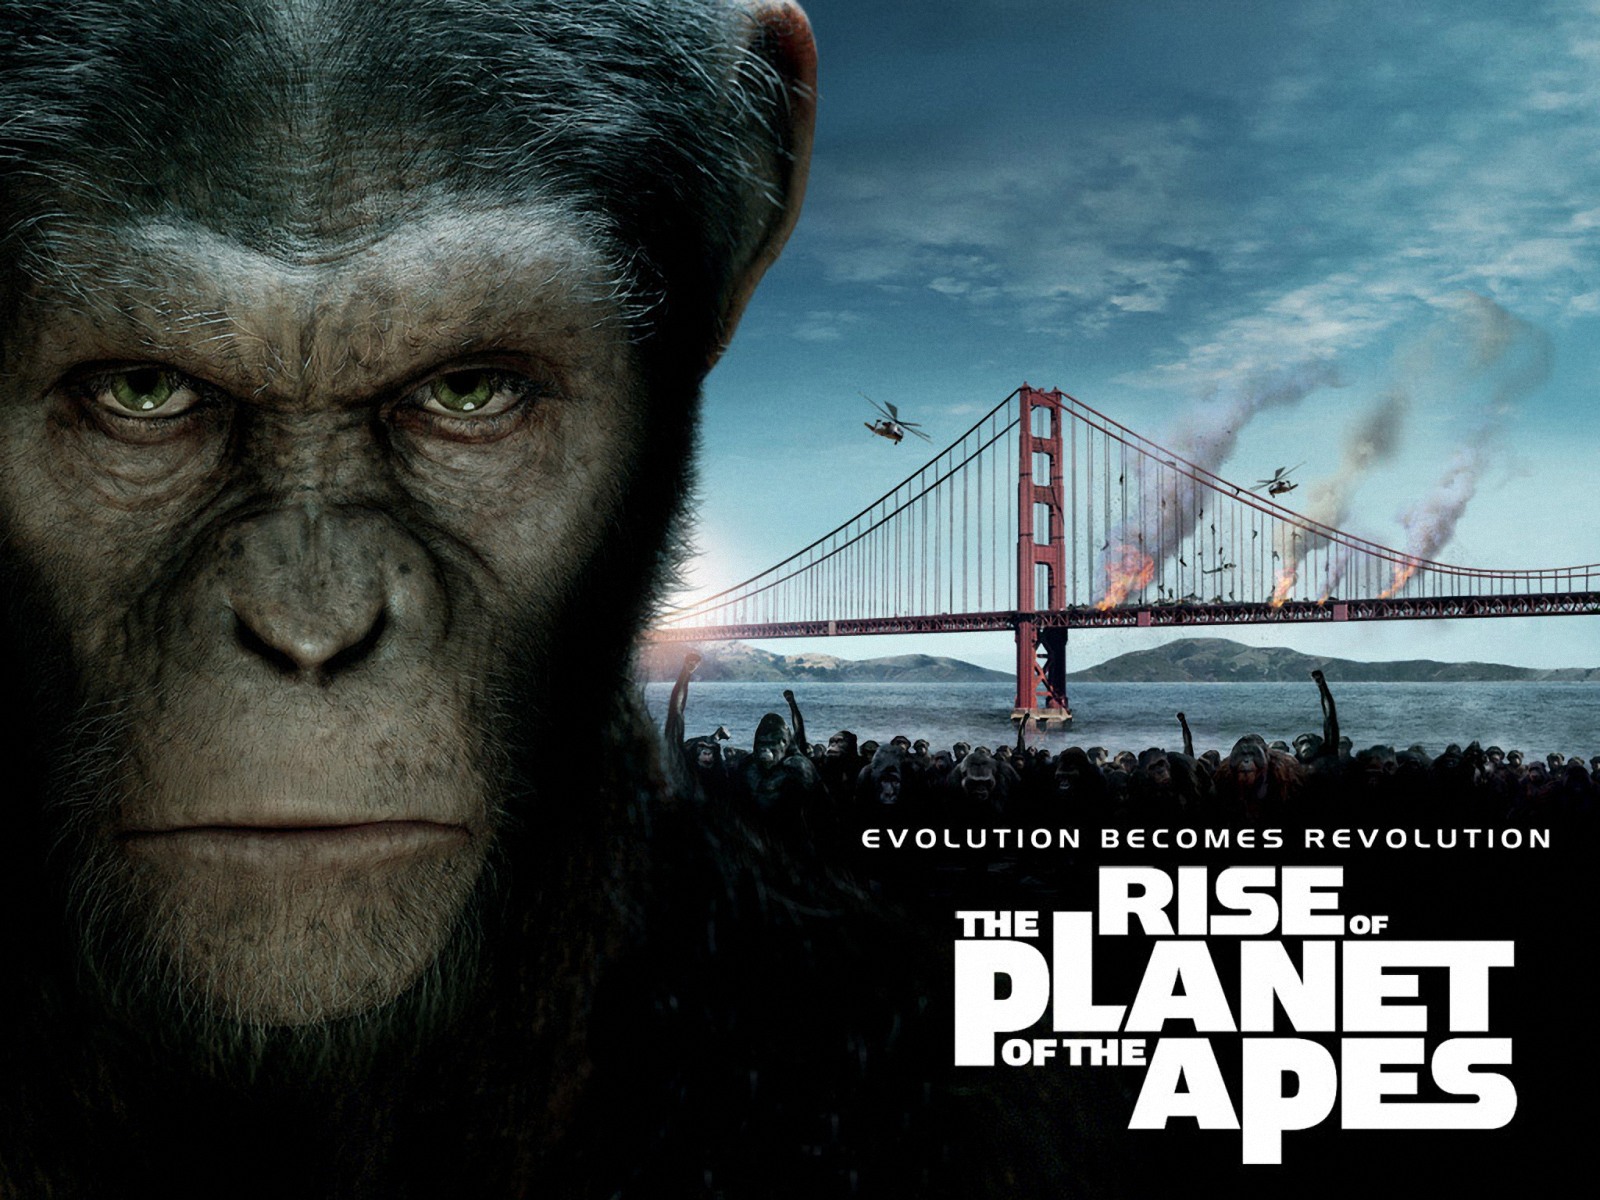 the Planet of the Apes